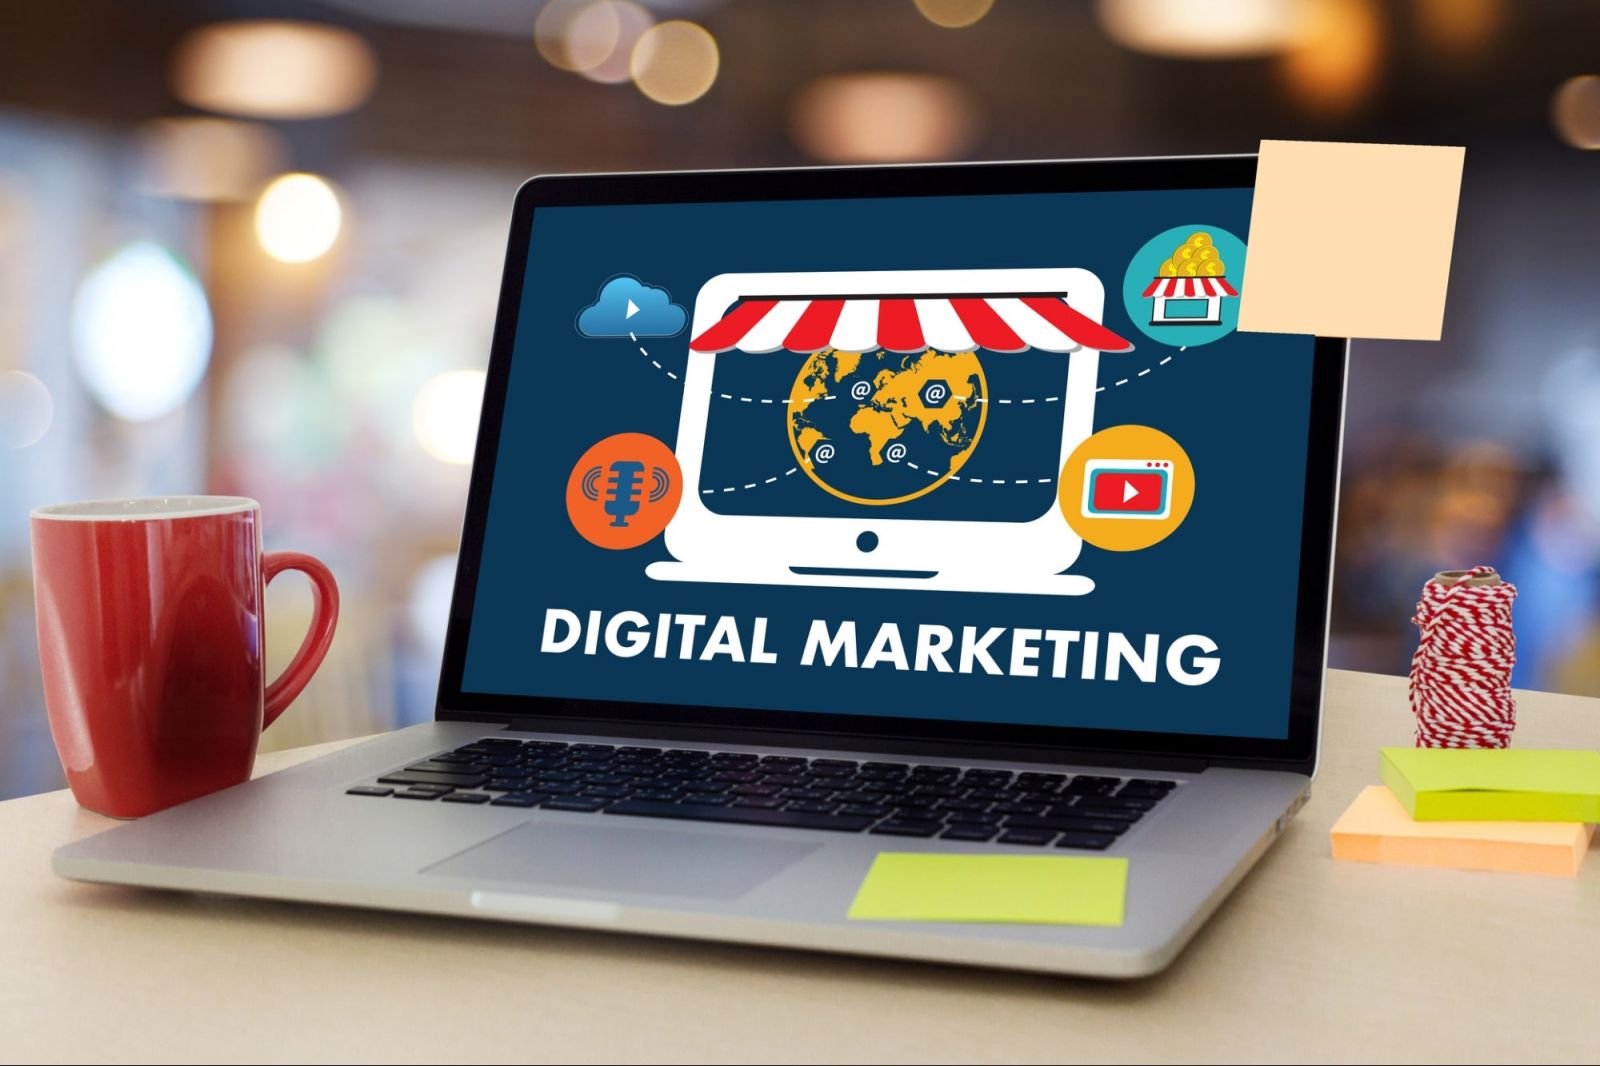 How to create a Digital Marketing plan in 5 steps